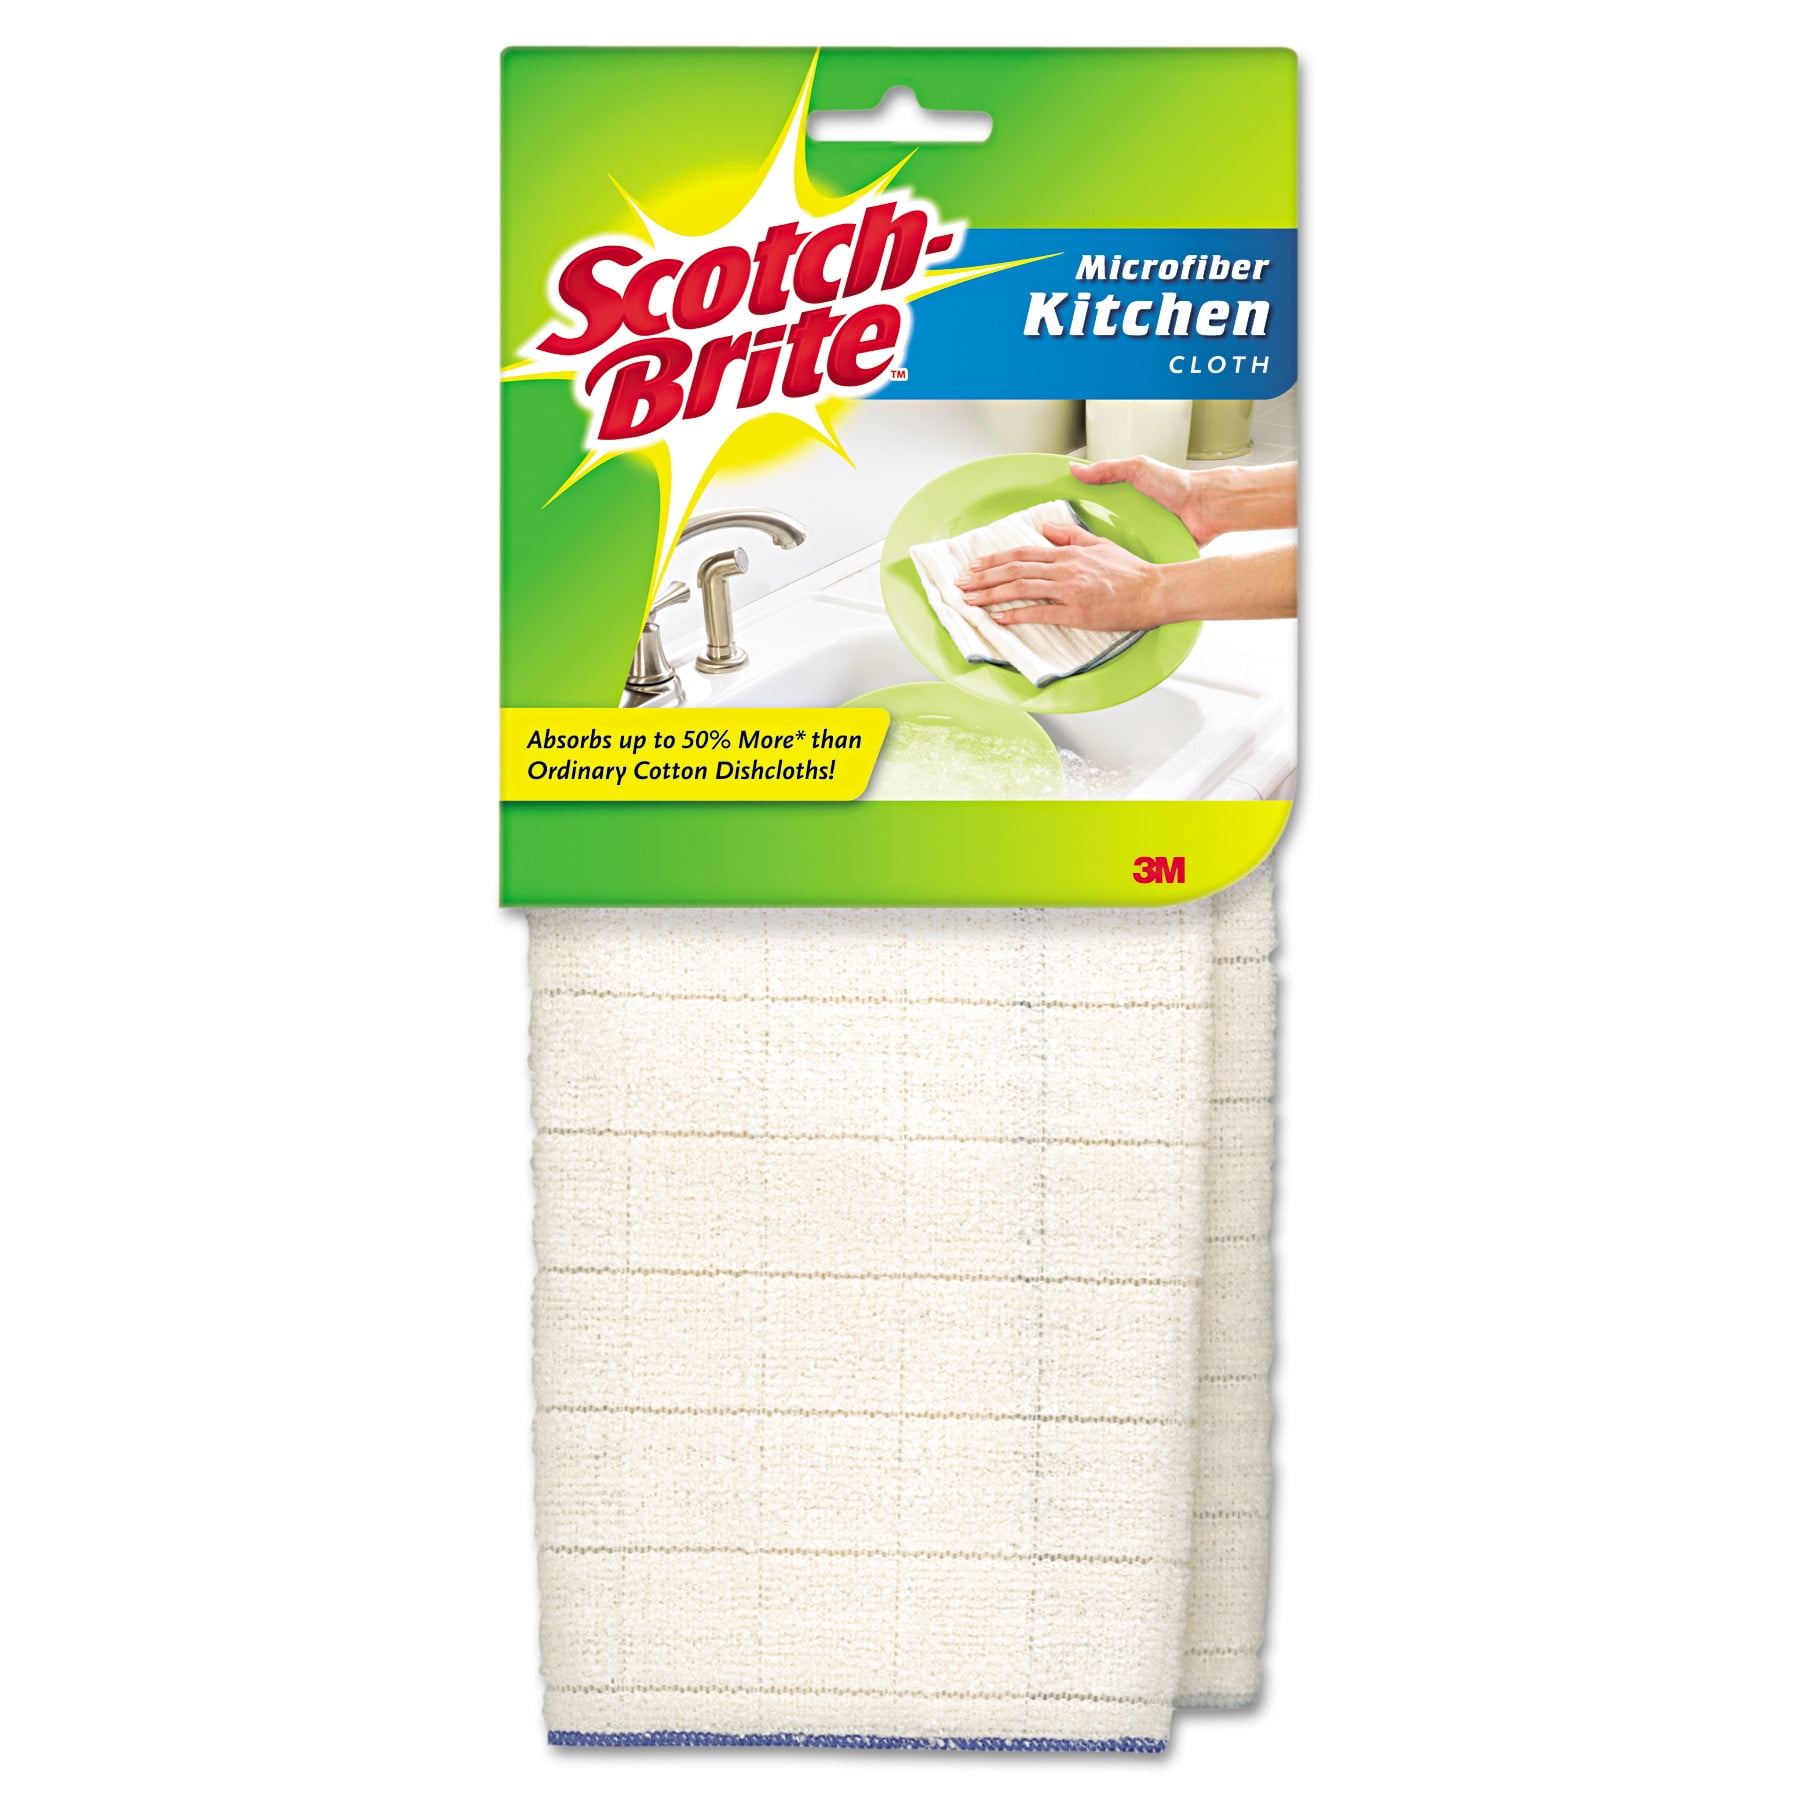 6 Woven Kitchen Cleaning Cloth Oil Removal Microfiber Towel Dish Cloth 2 in one 